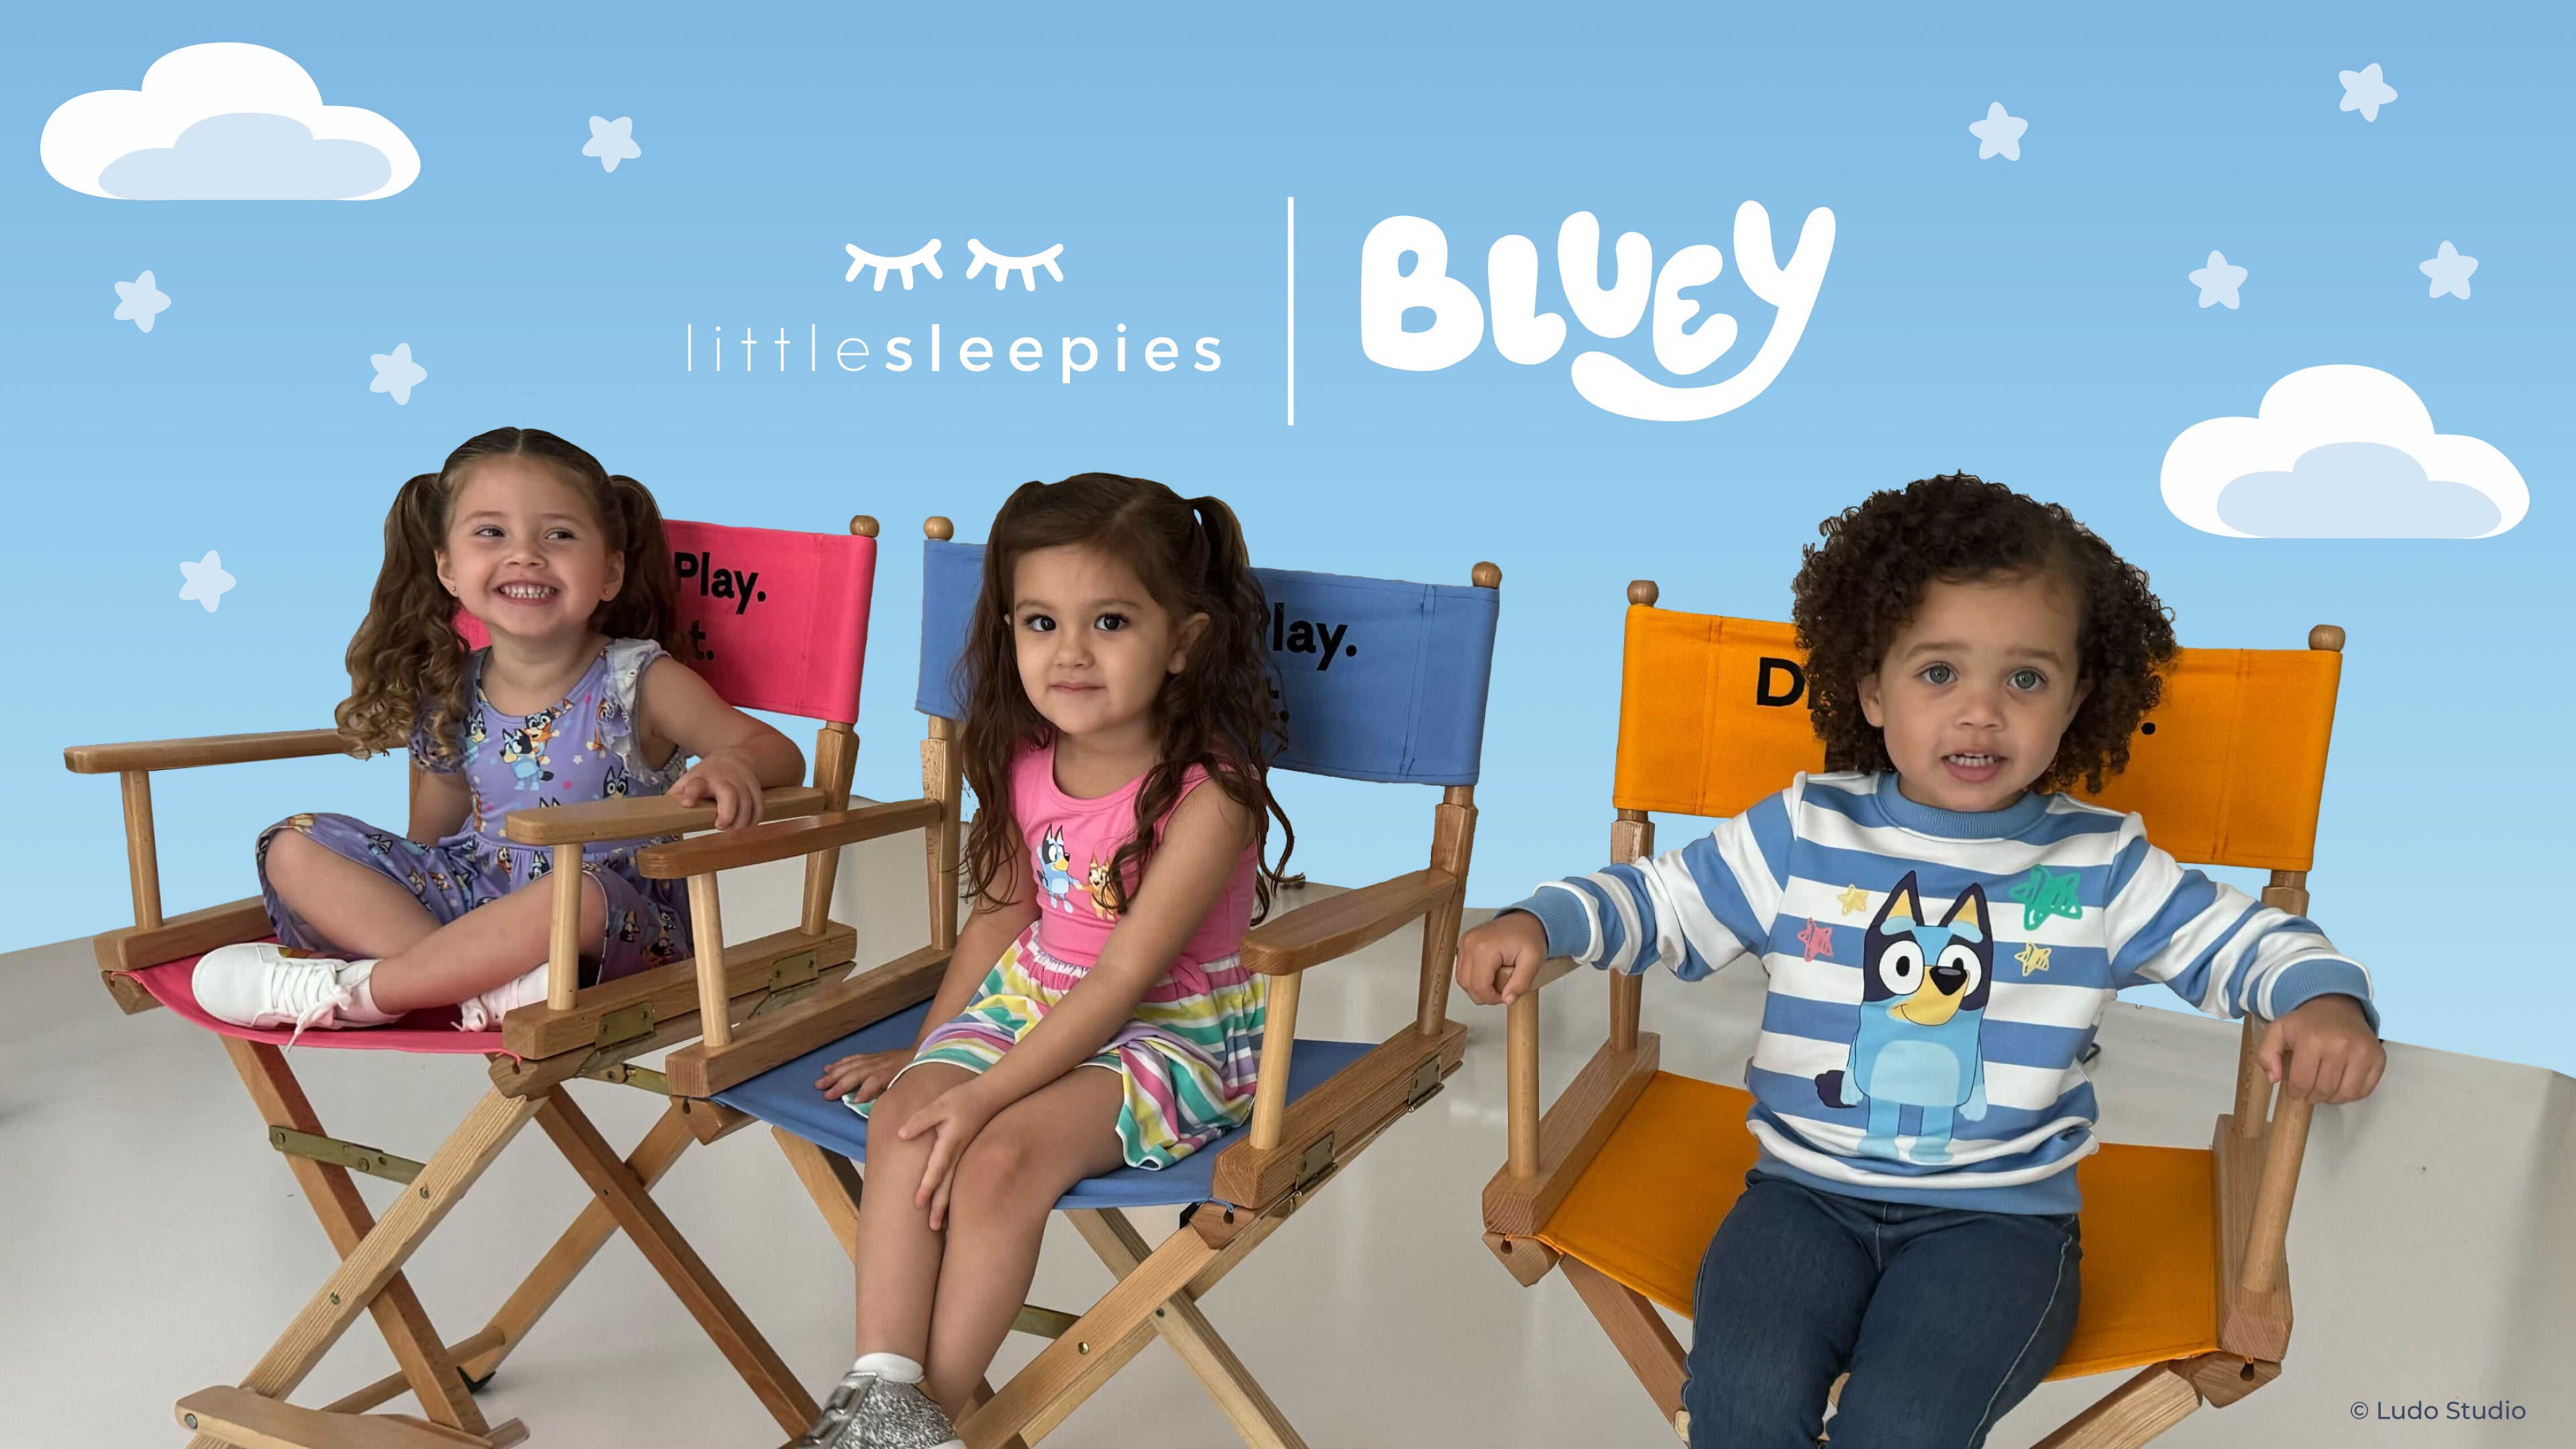 Three children sitting in chairs with a Bluey background